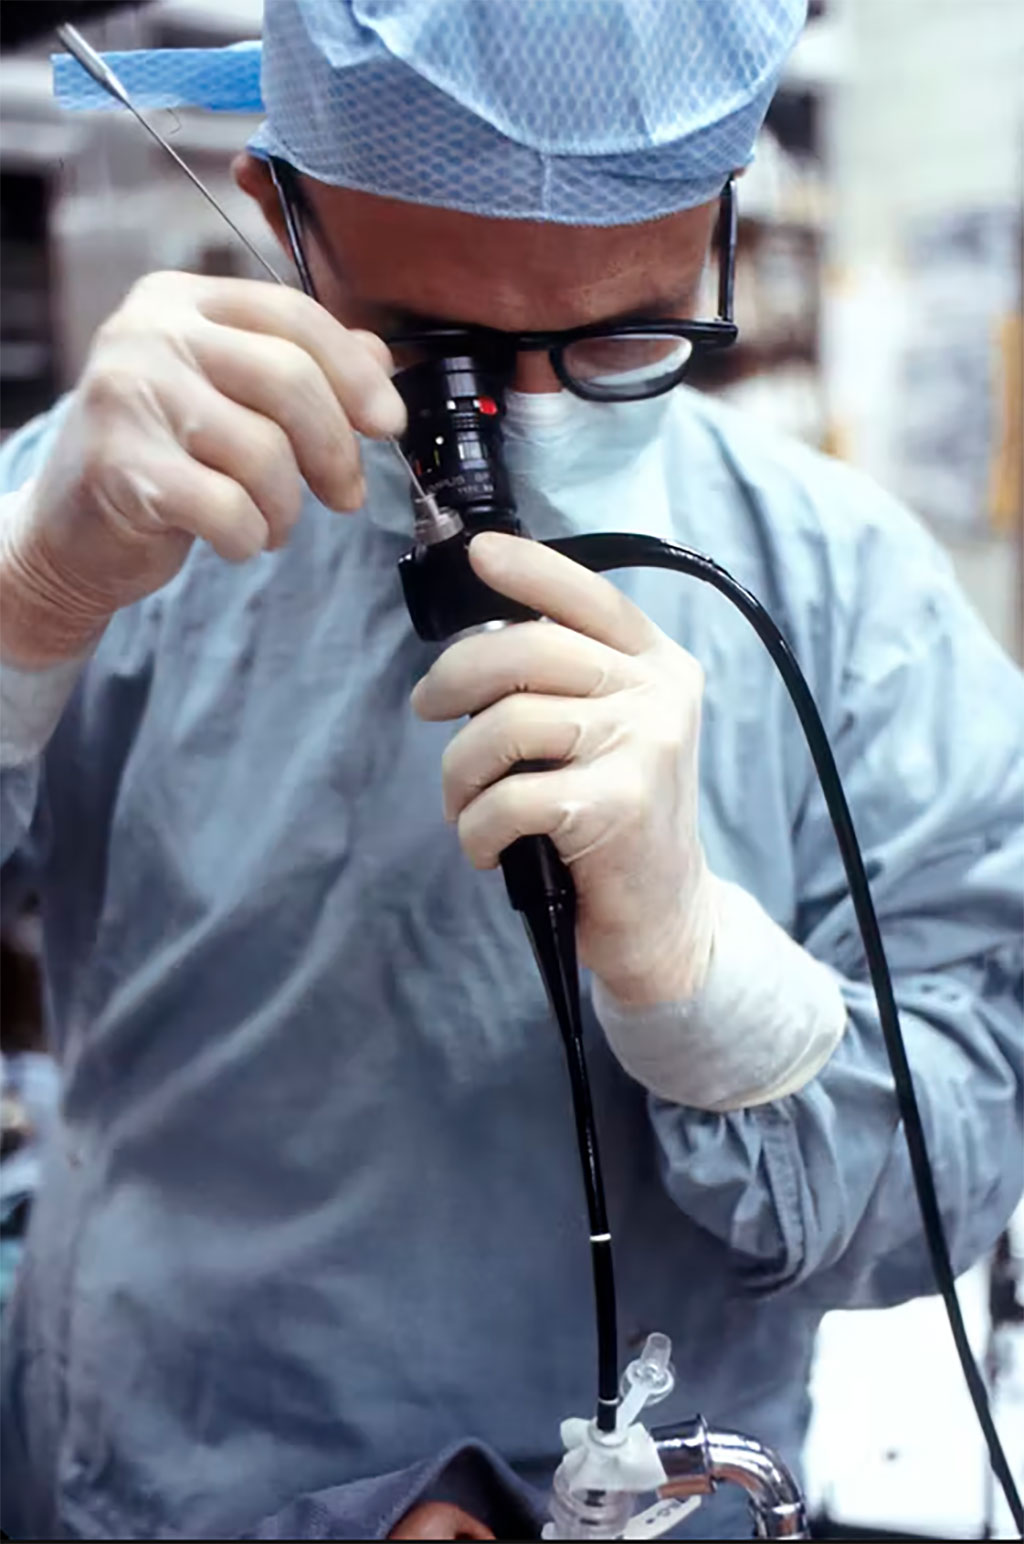 Image: Global endoscopy devices market was valued at over USD 31 billion in 2020 (Photo courtesy of Unsplash)